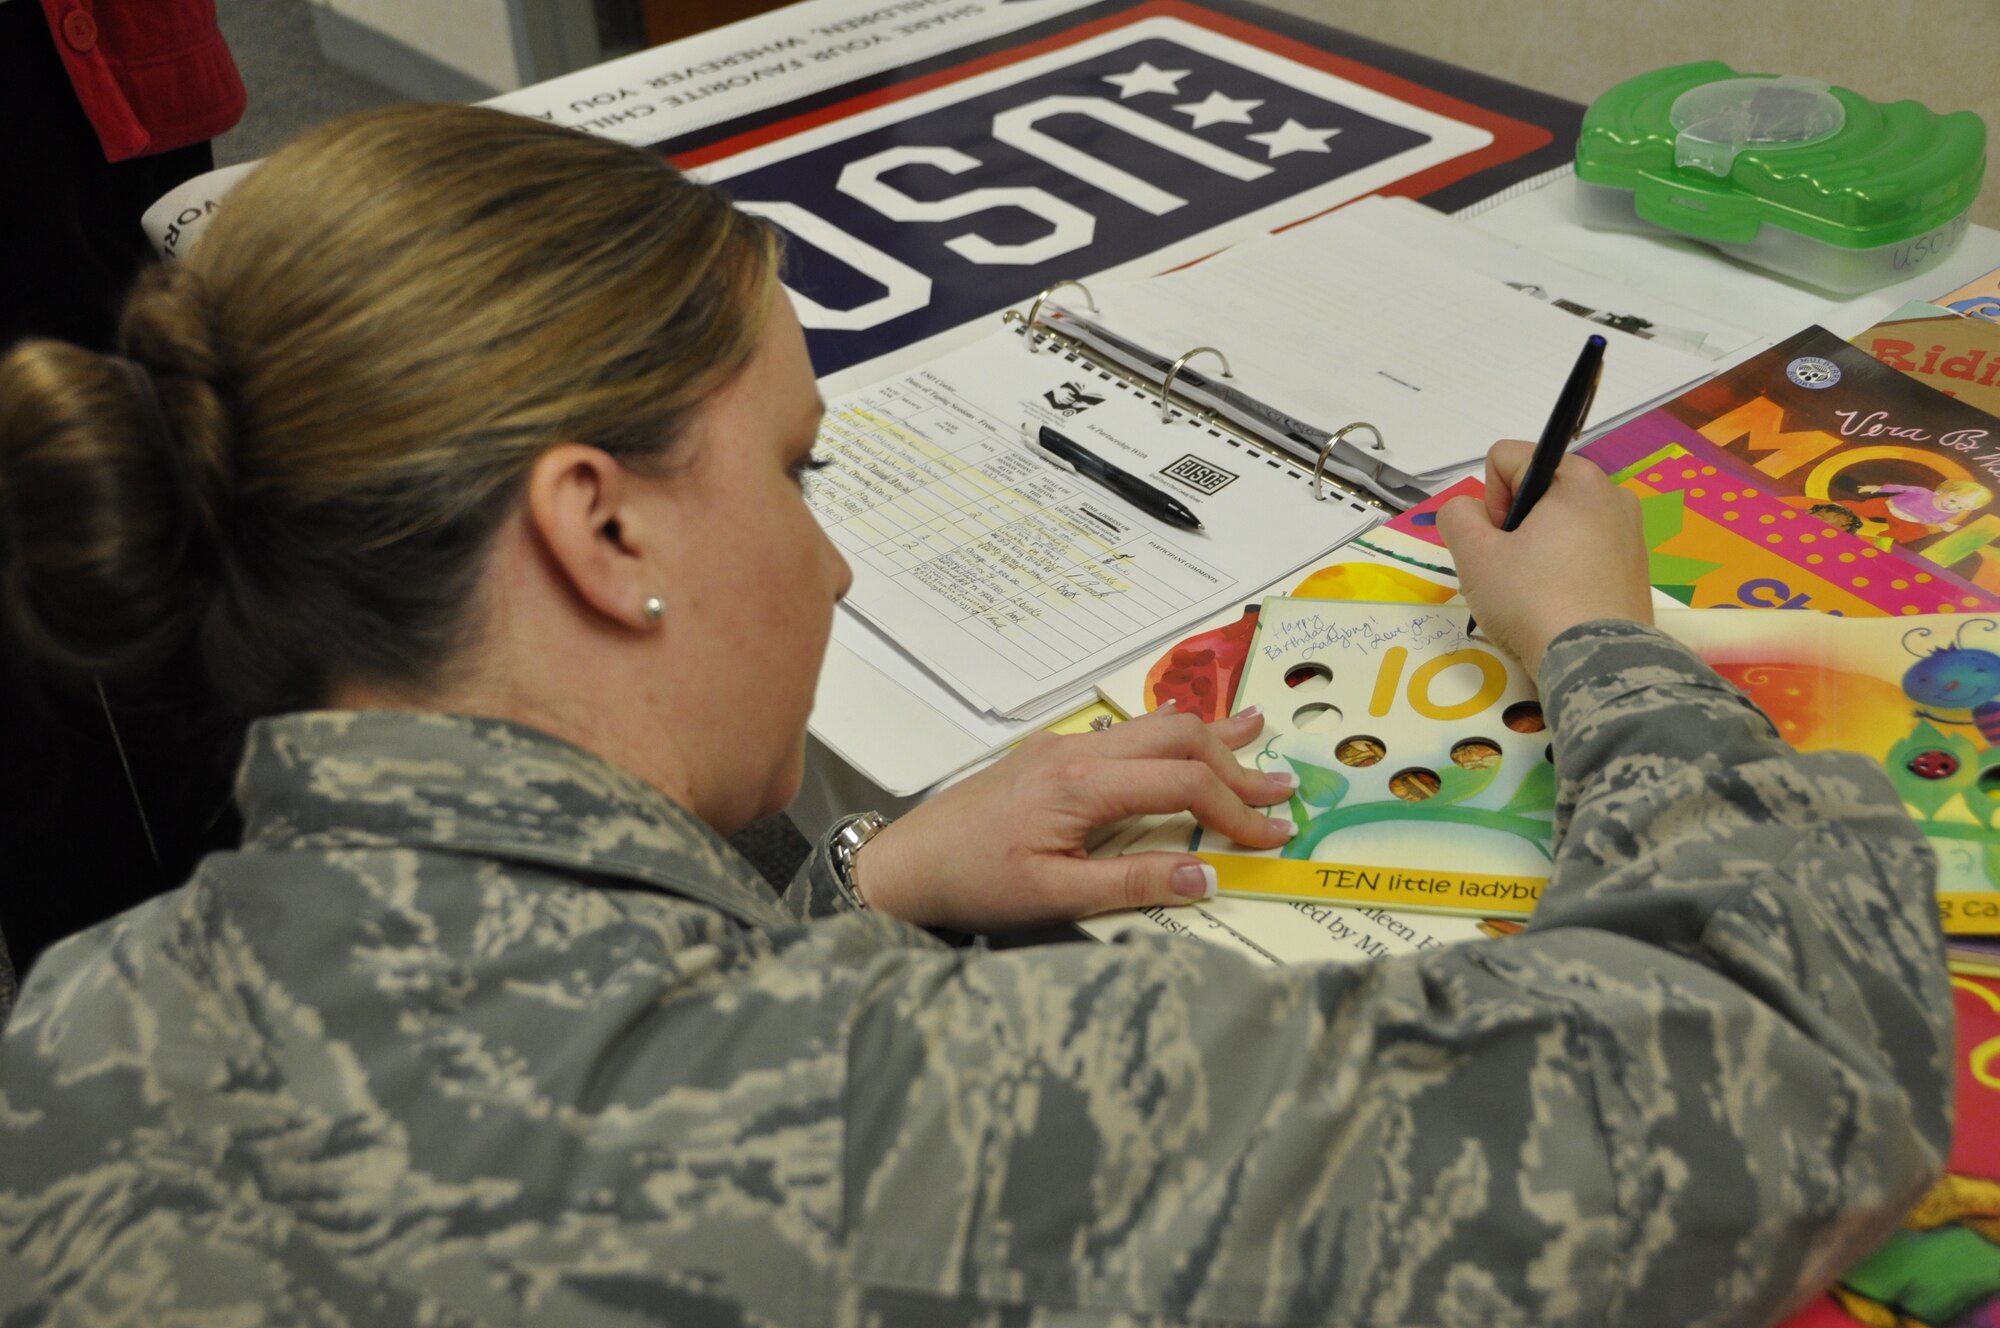 Air Force Maj. Jennifer M. Piggott, Public Affairs Officer, signs a book she plans to read to her daughter during the USO Read Around the World event at Air Force Mortuary Affairs Operations, Dover Air Force Base, Del., March 25, 2014.  Piggott is deployed to the Mortuary from Joint Force Headquarters, Massachusetts Air National Guard, Hanscom AFB, Mass.  (U.S. Air Force photo/Staff Sgt. Chalanda Roberts)